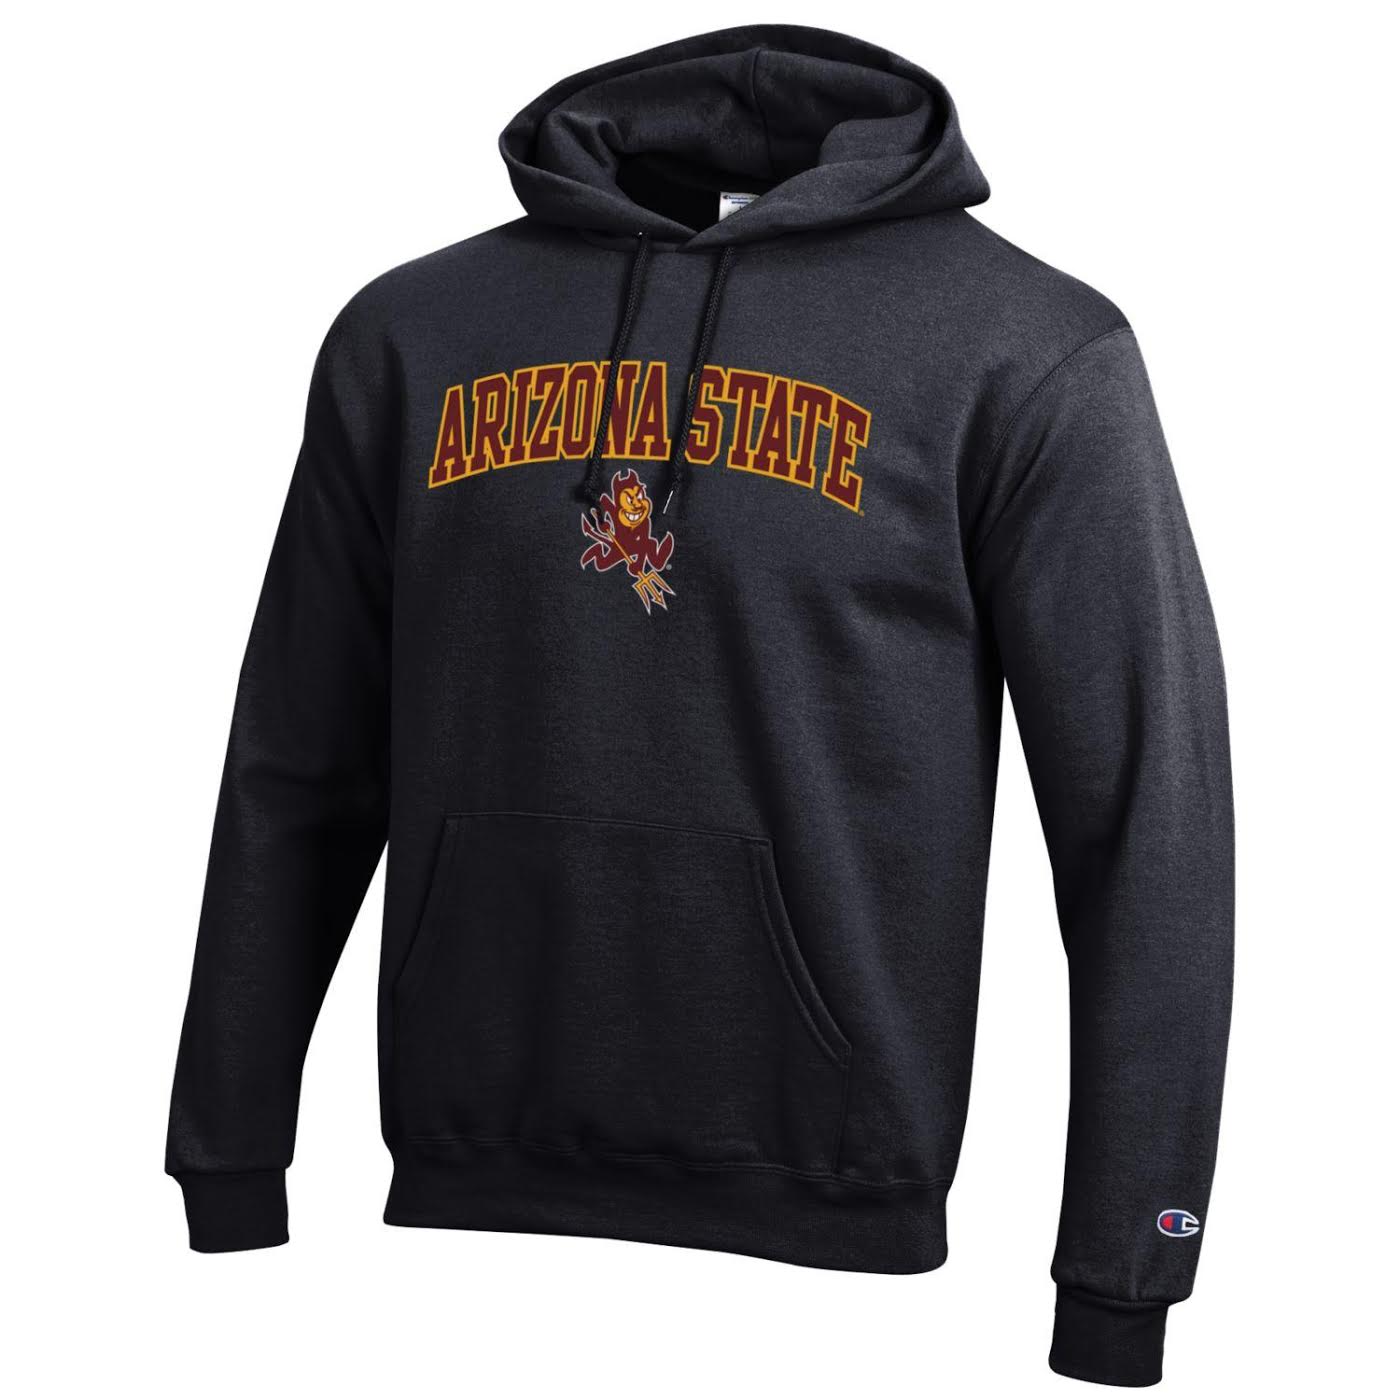 ASU black Champion hoody with single front pocket and 'Arizona State' arched over Sparky 